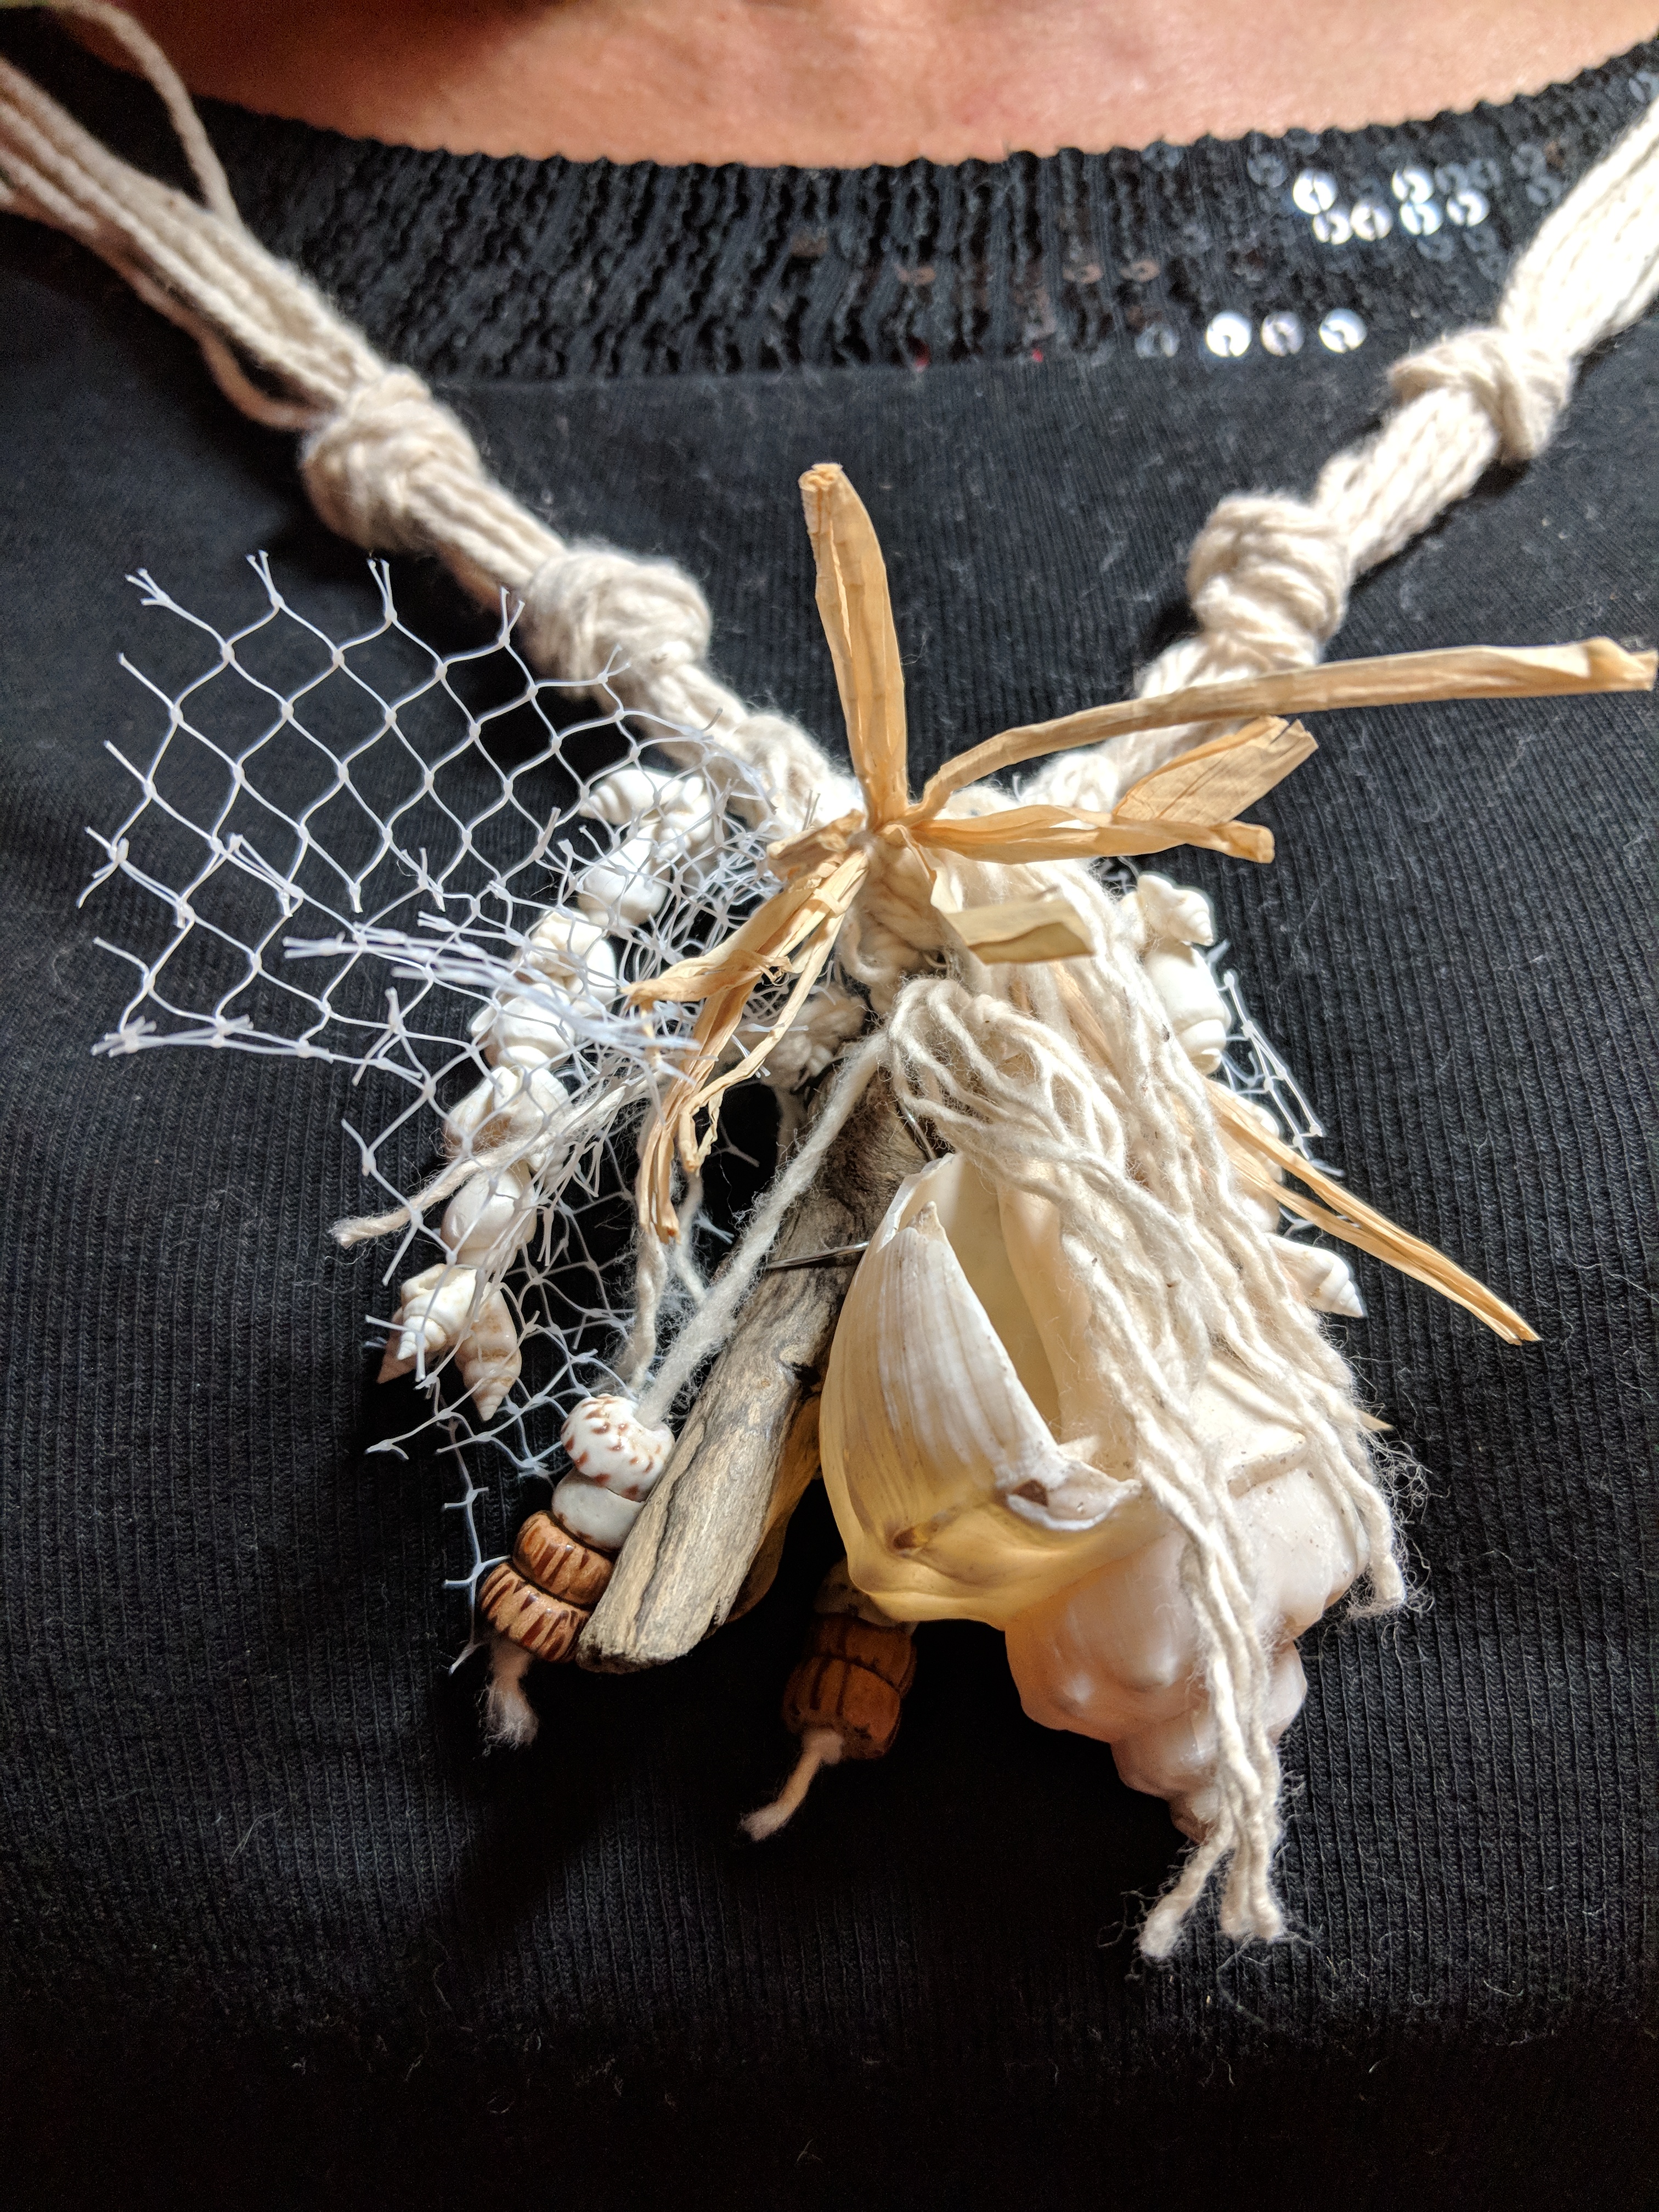 Necklace made with found objects